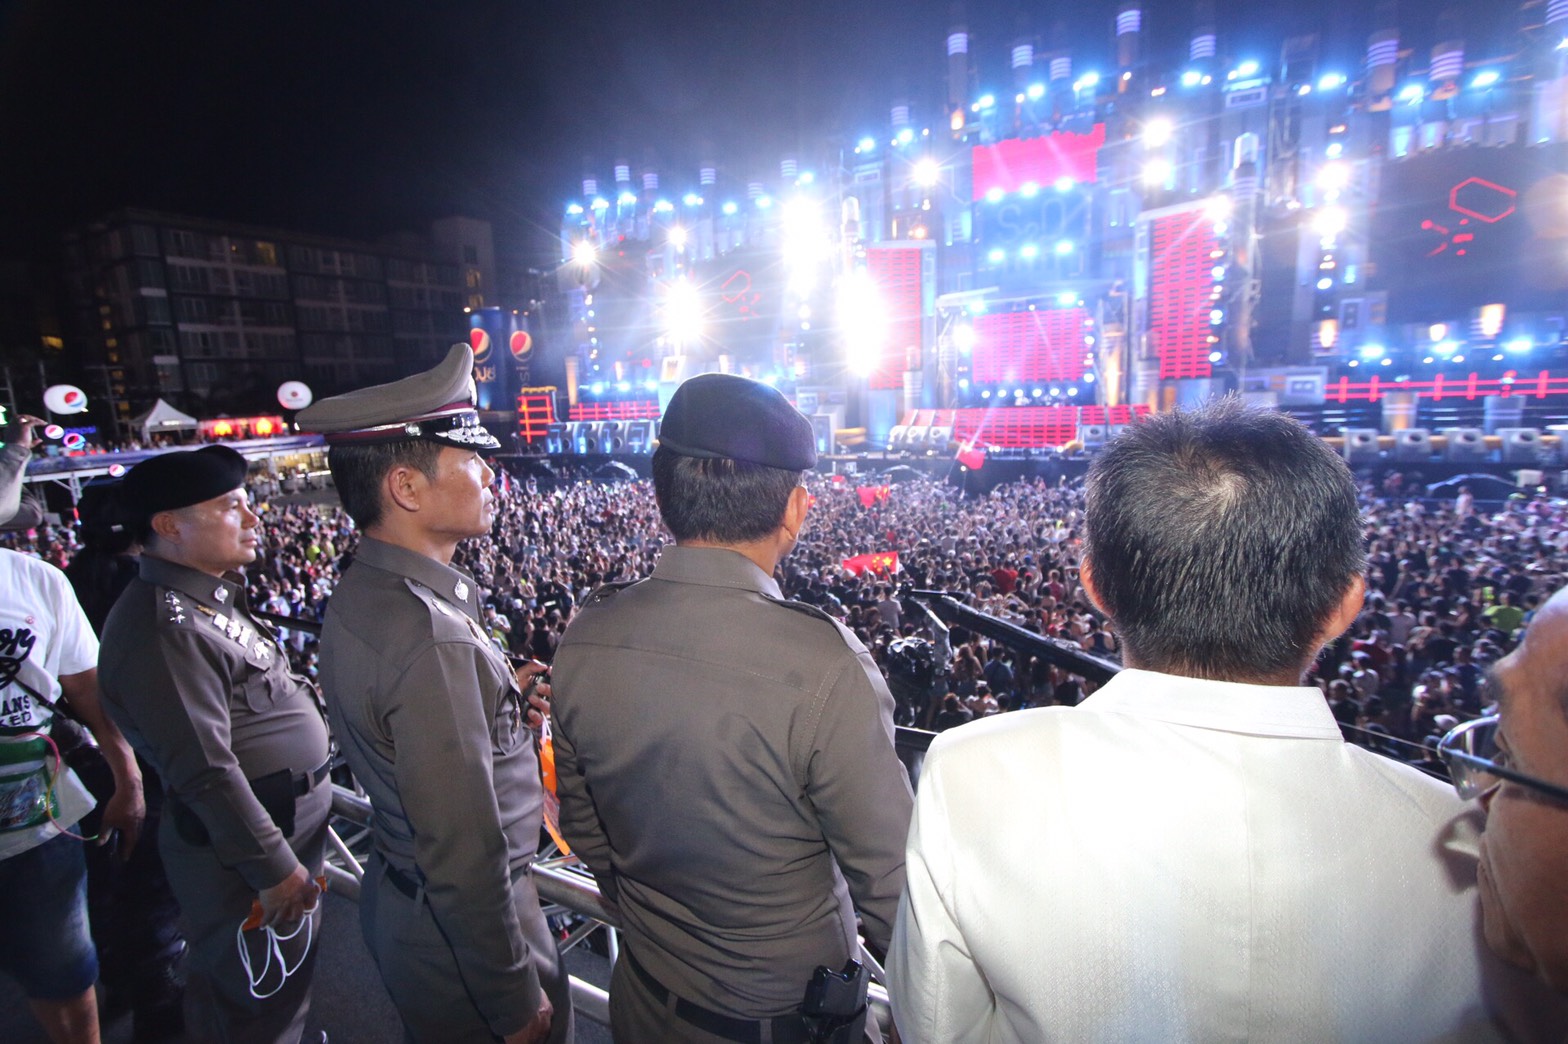 Lt. Gen. Sanit Mahathavorn watches the festivities with other policemen Thursday night at the S20 Songkran Music Festival in Bangkok.